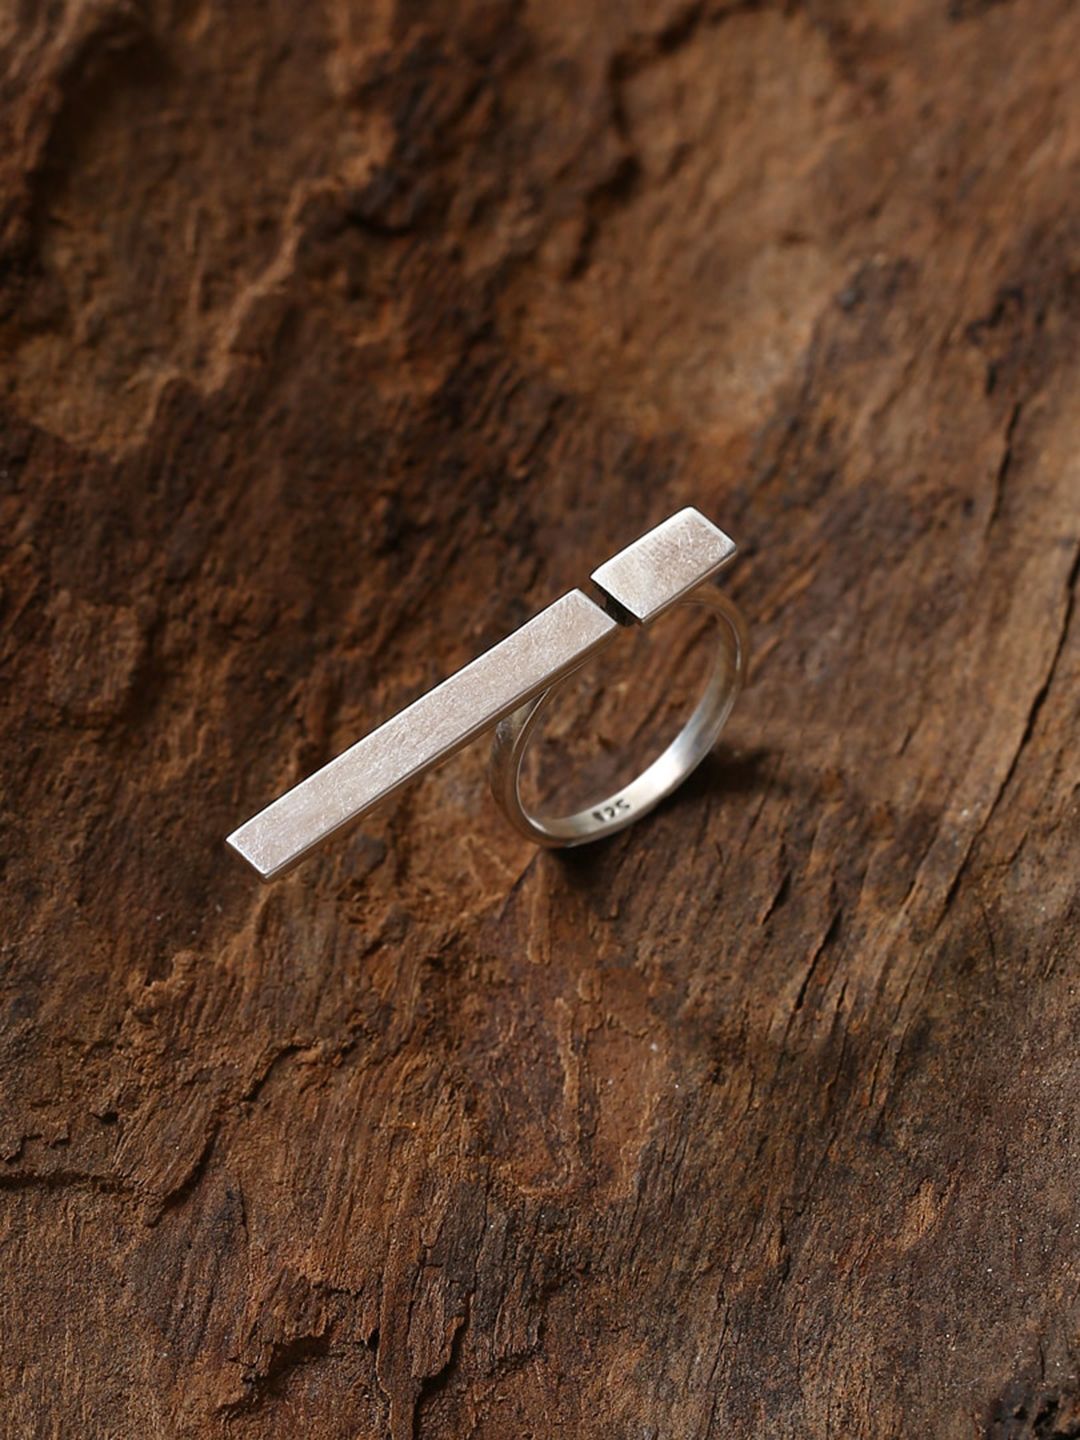 ADORN by Nikita Ladiwala 92.5 Sterling Silver Silver-Toned Adjustable Finger Ring Price in India